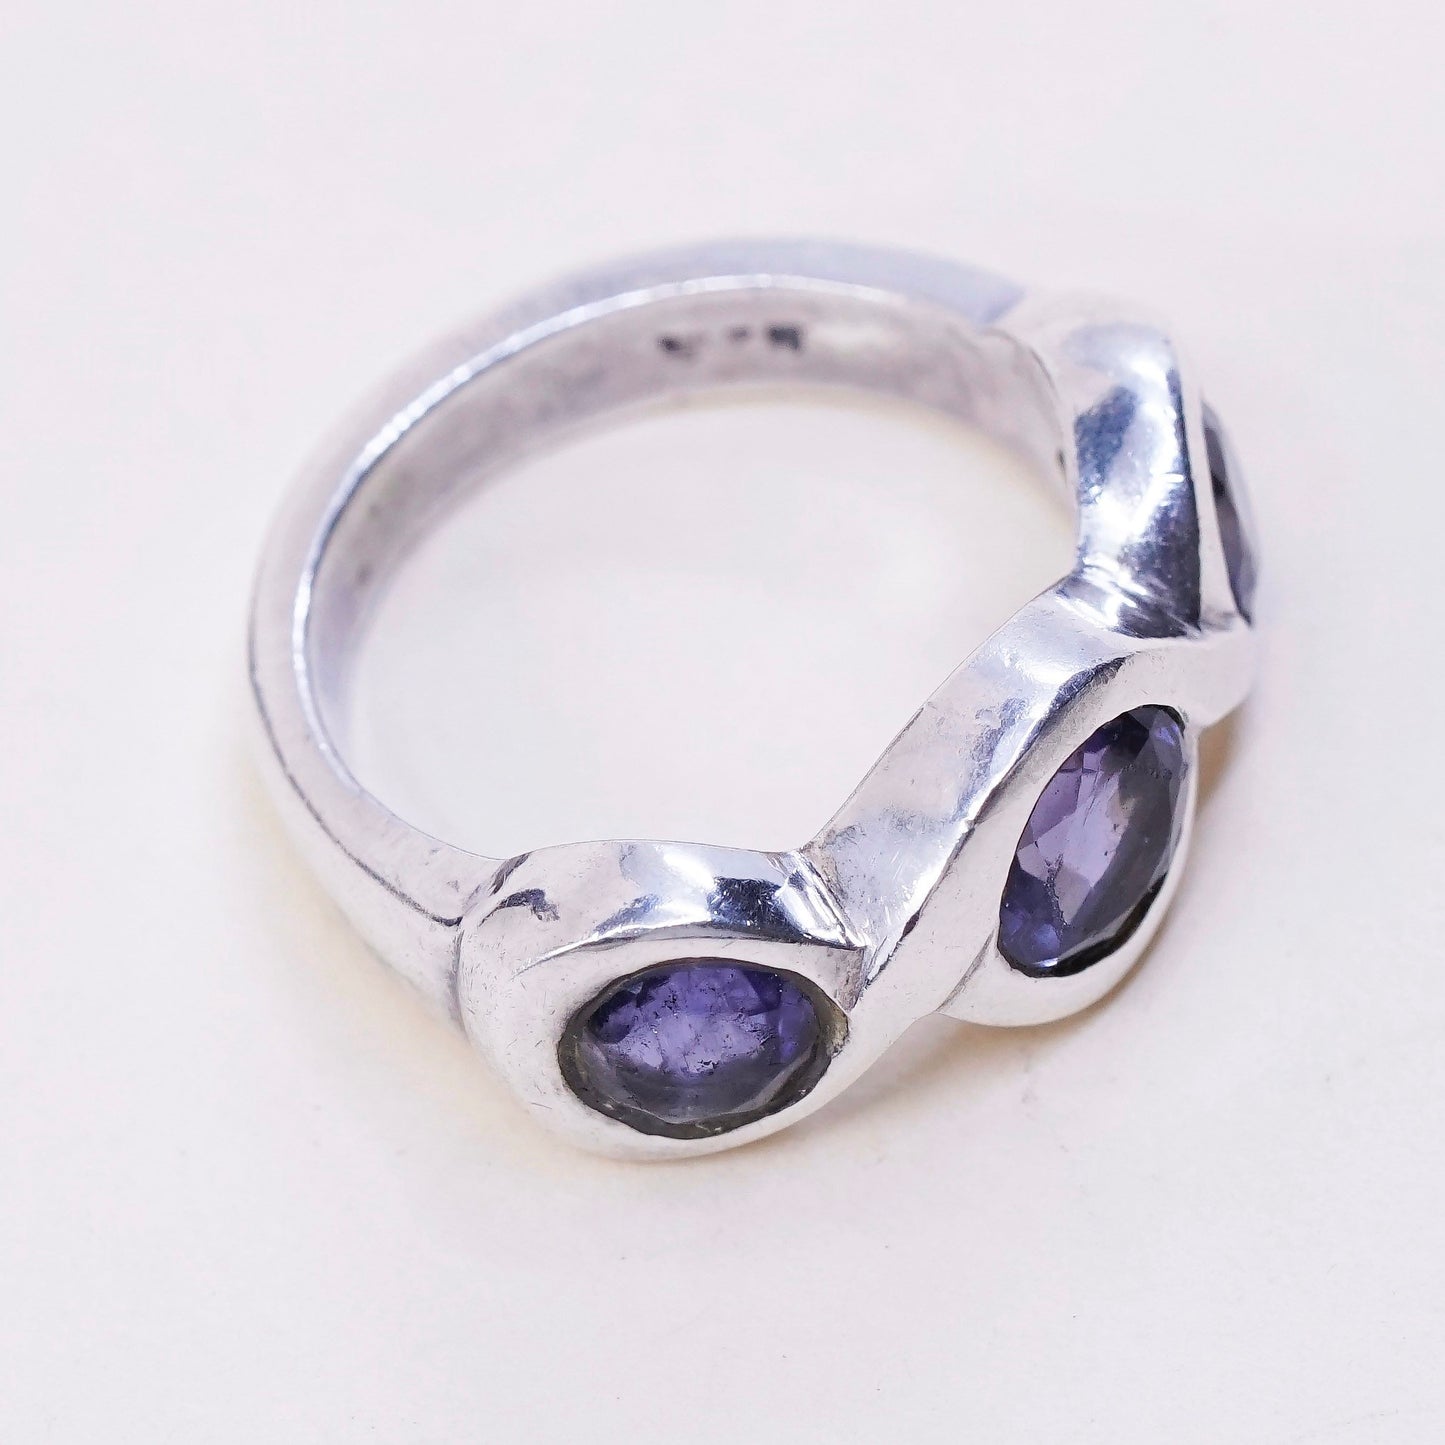 Size 5.25, vintage Sterling silver handmade ring, 925 band with amethyst